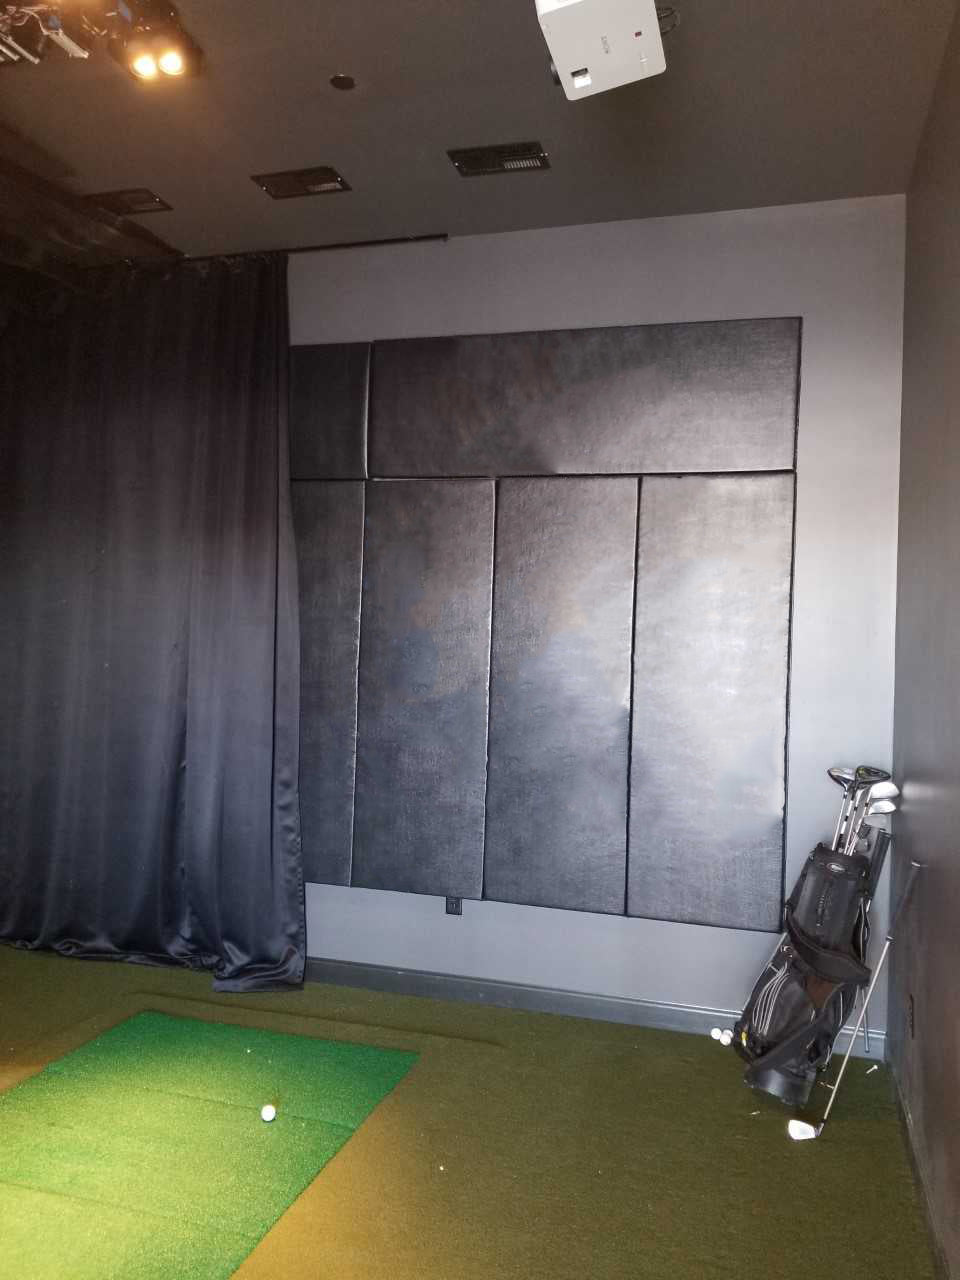 Black Golf Simulator Wall Pads made in the USA 